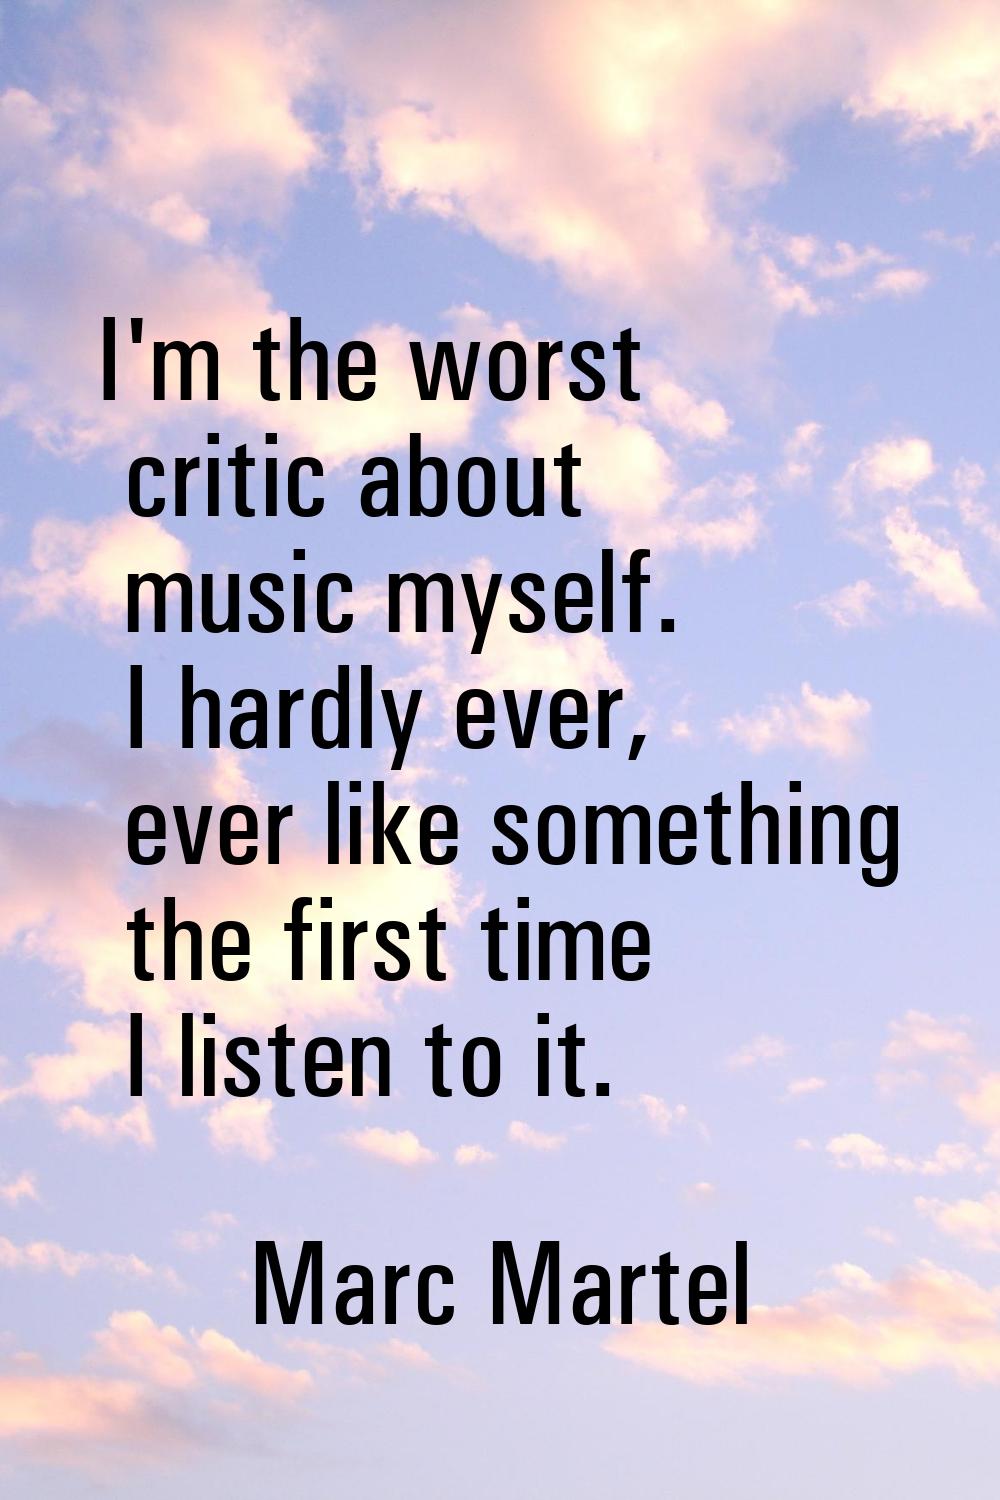 I'm the worst critic about music myself. I hardly ever, ever like something the first time I listen